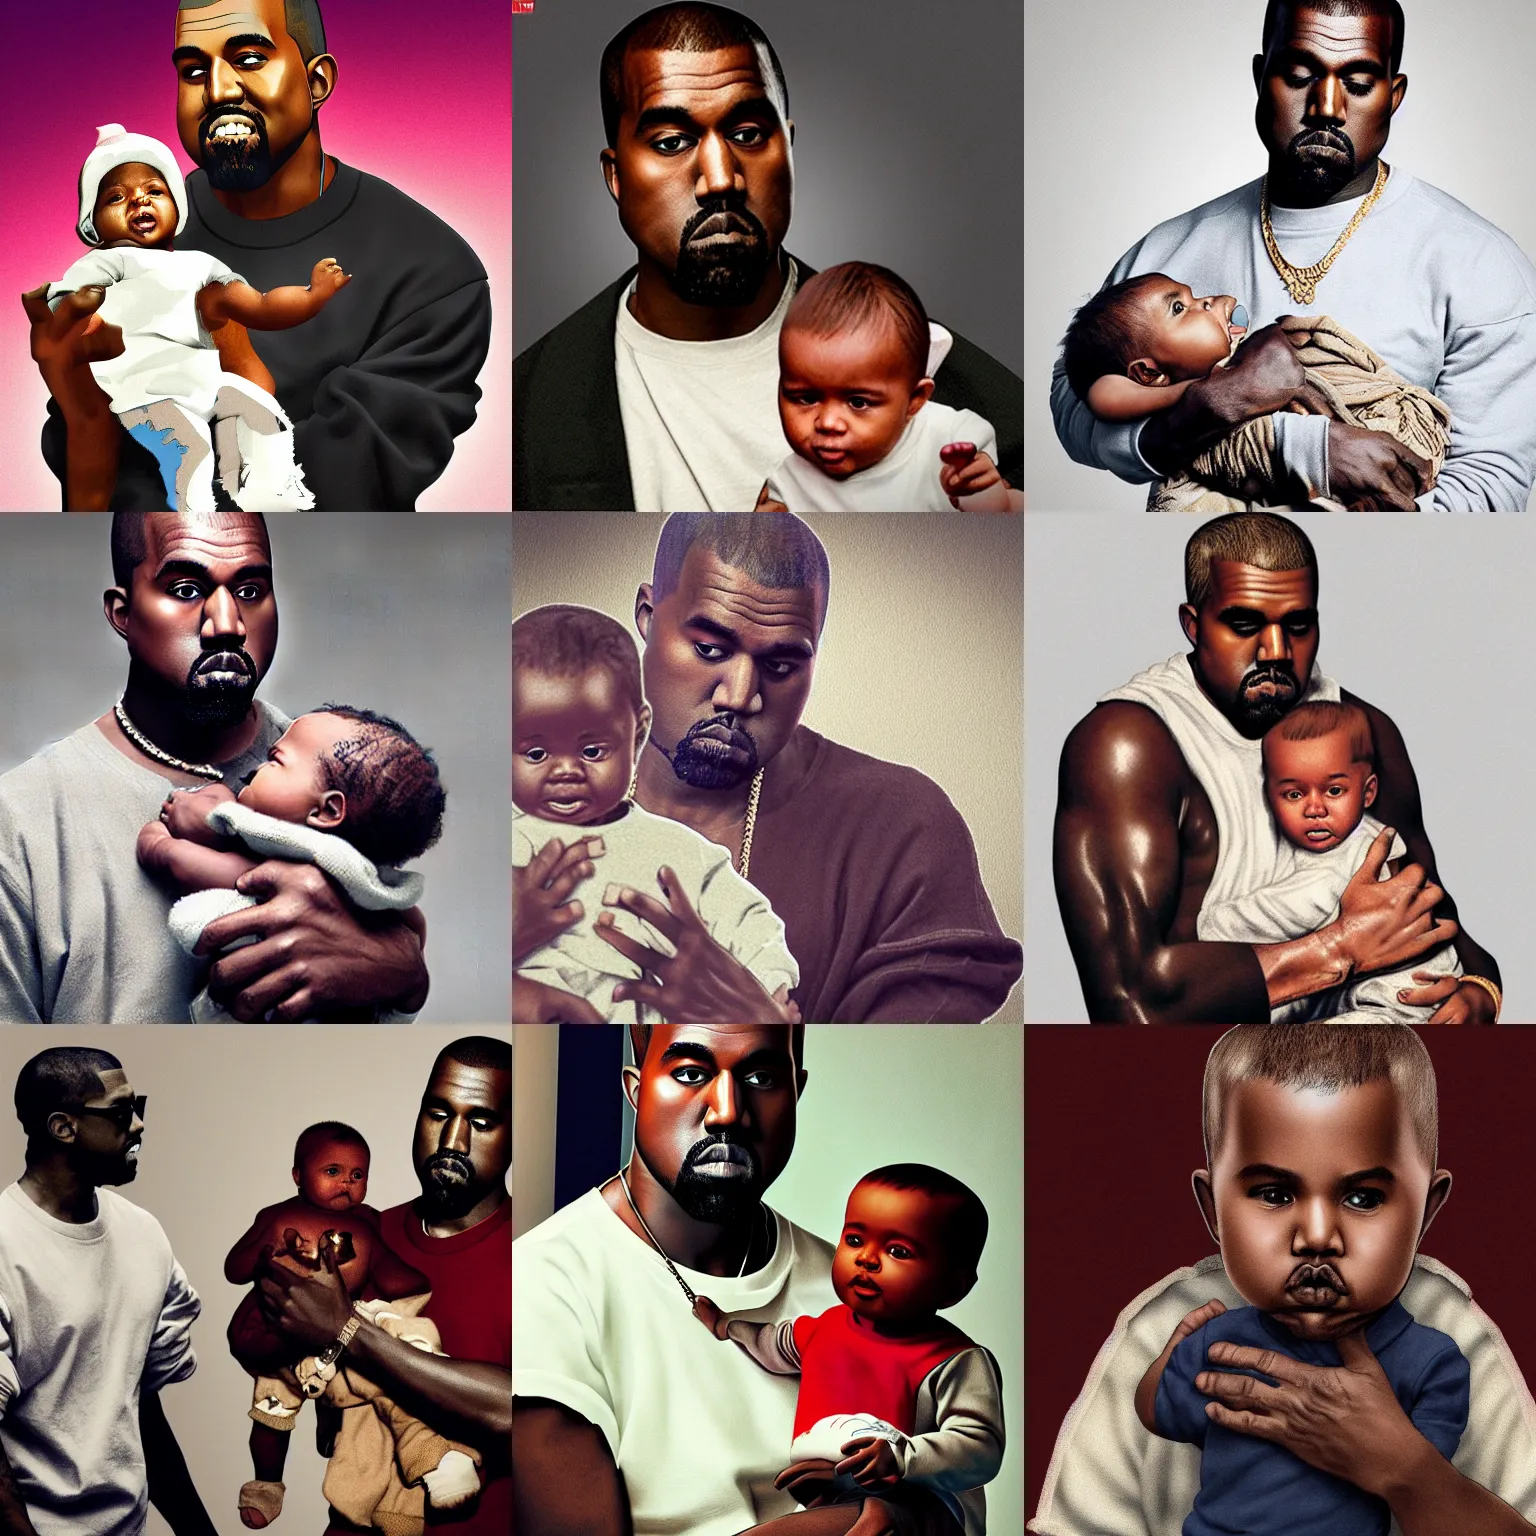 kanye west holding a baby with the face of kanye west, | Stable ...